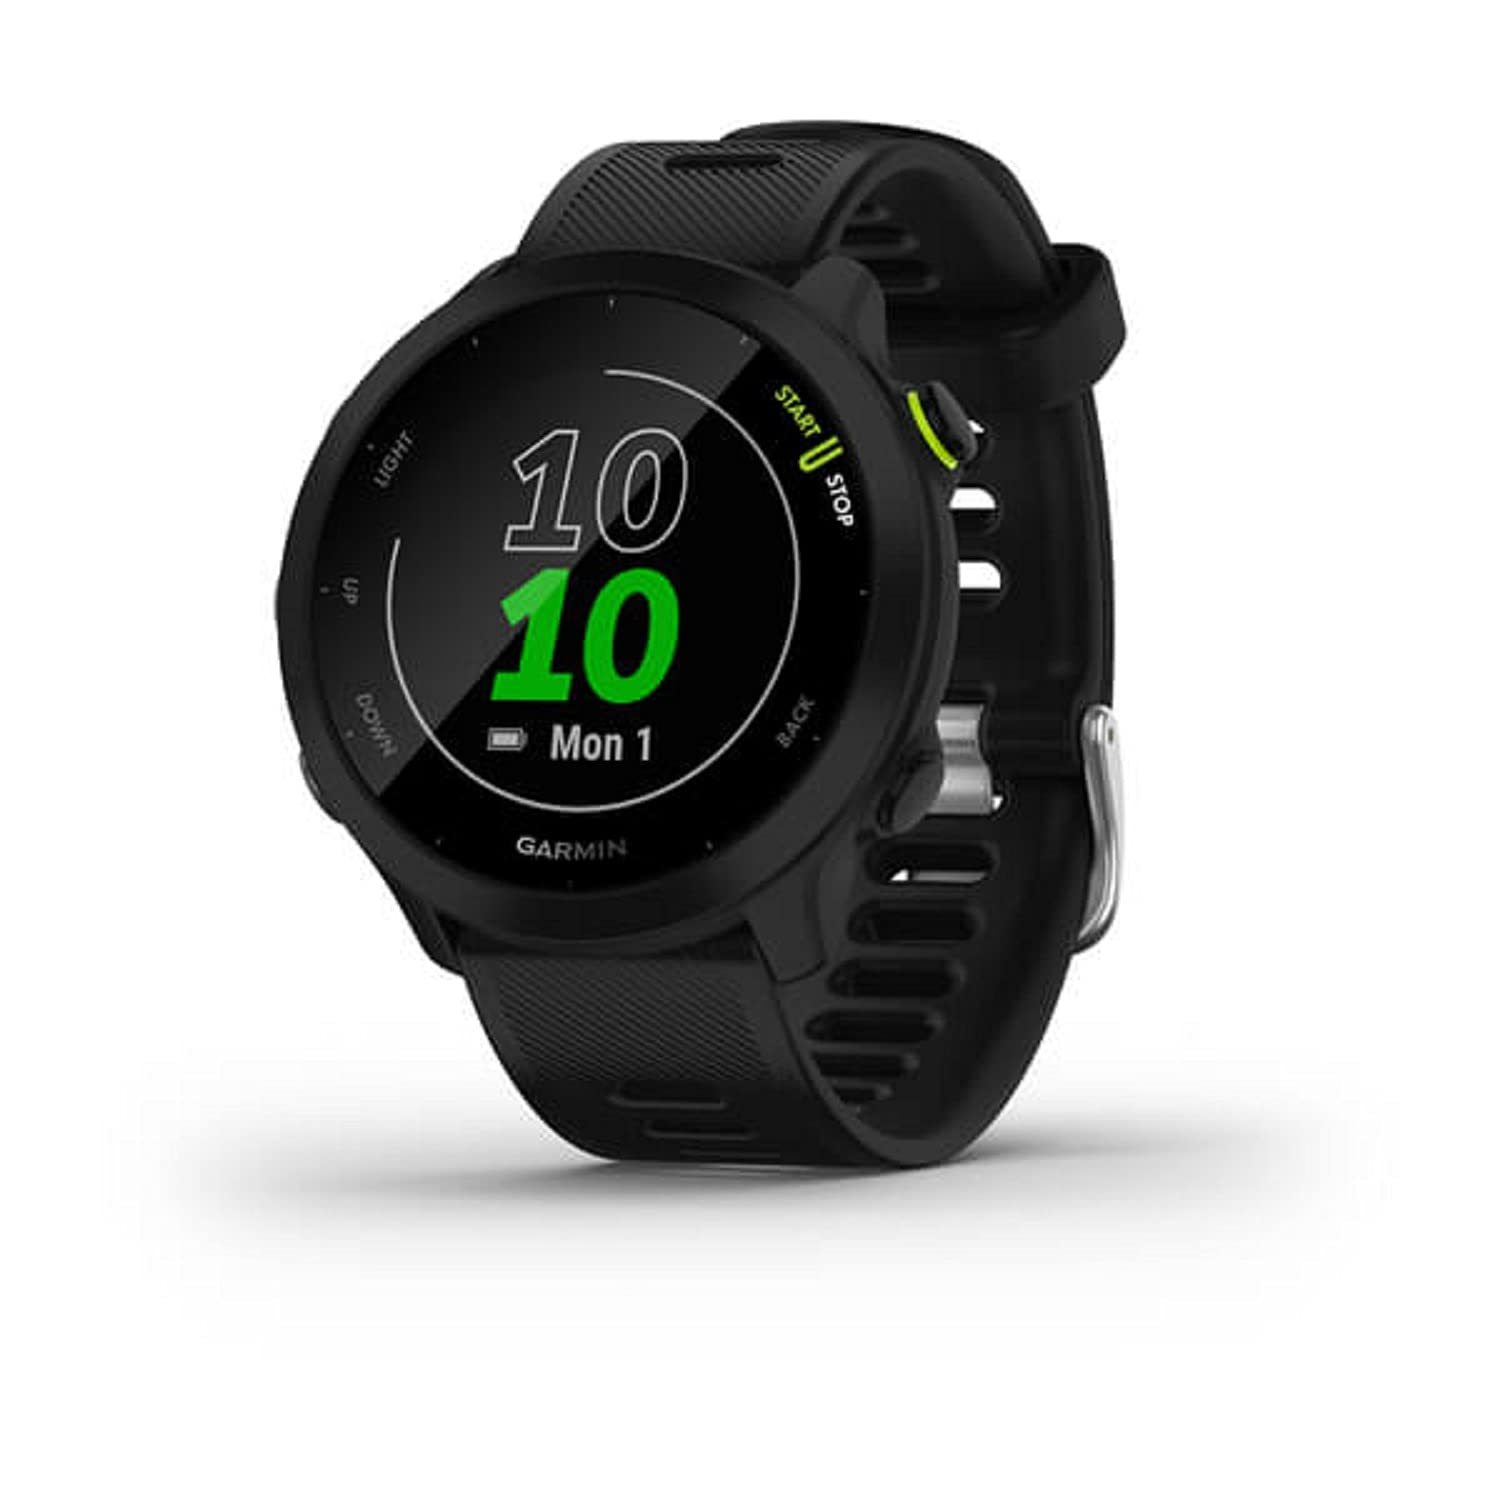 Garmin 010-02562-00 Forerunner 55, GPS Running Watch with Daily Suggested Workou - $279.99